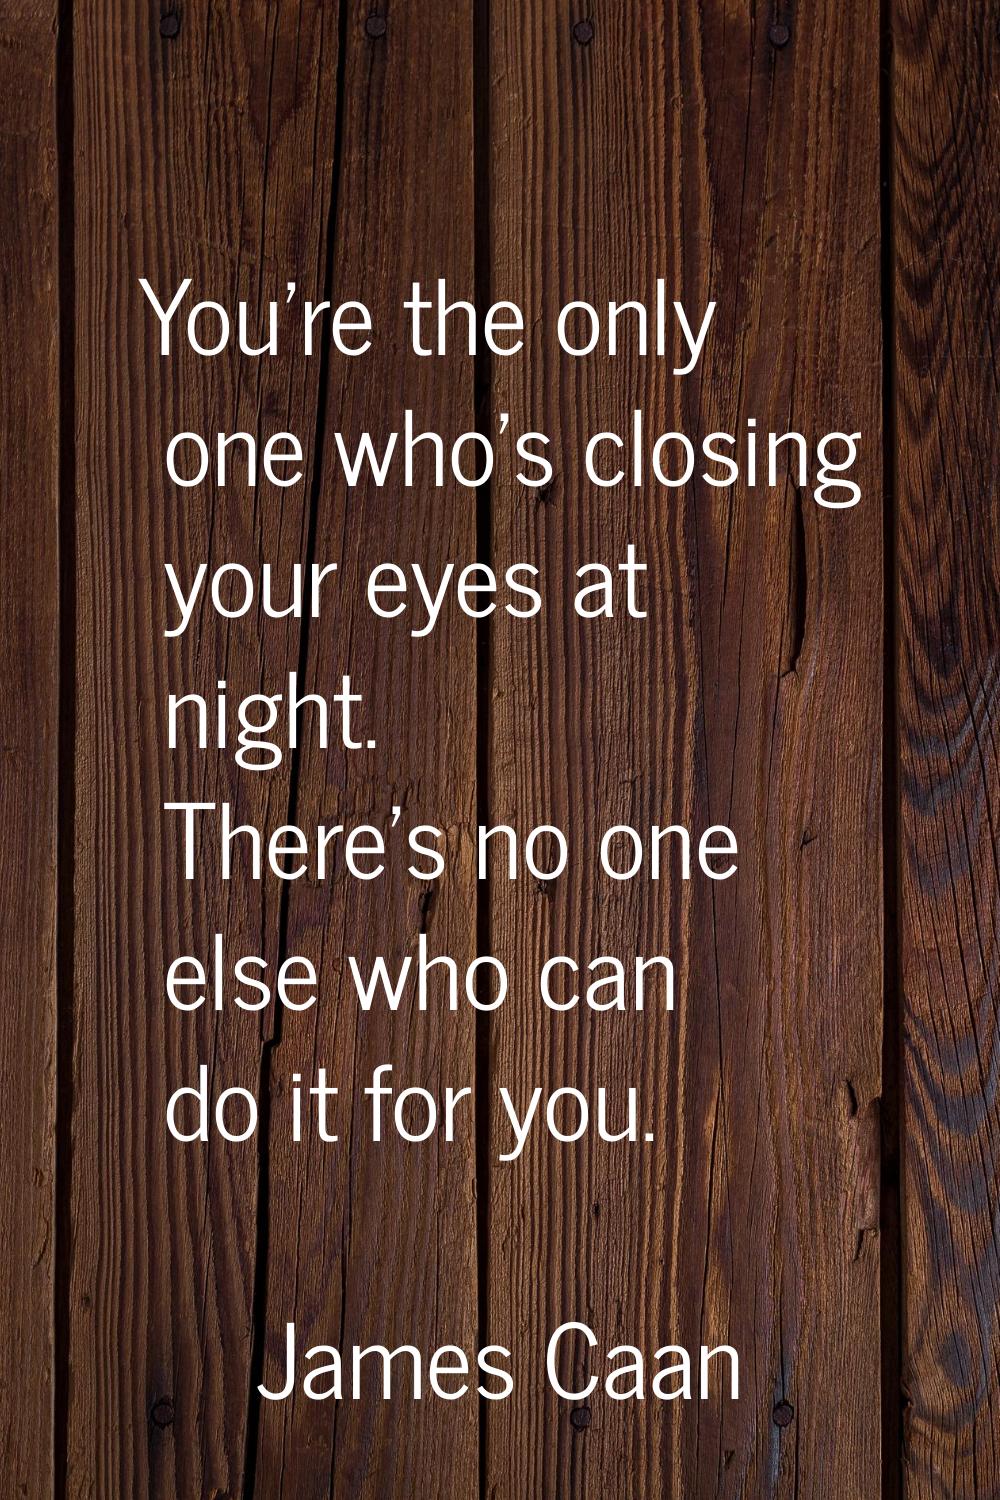 You're the only one who's closing your eyes at night. There's no one else who can do it for you.